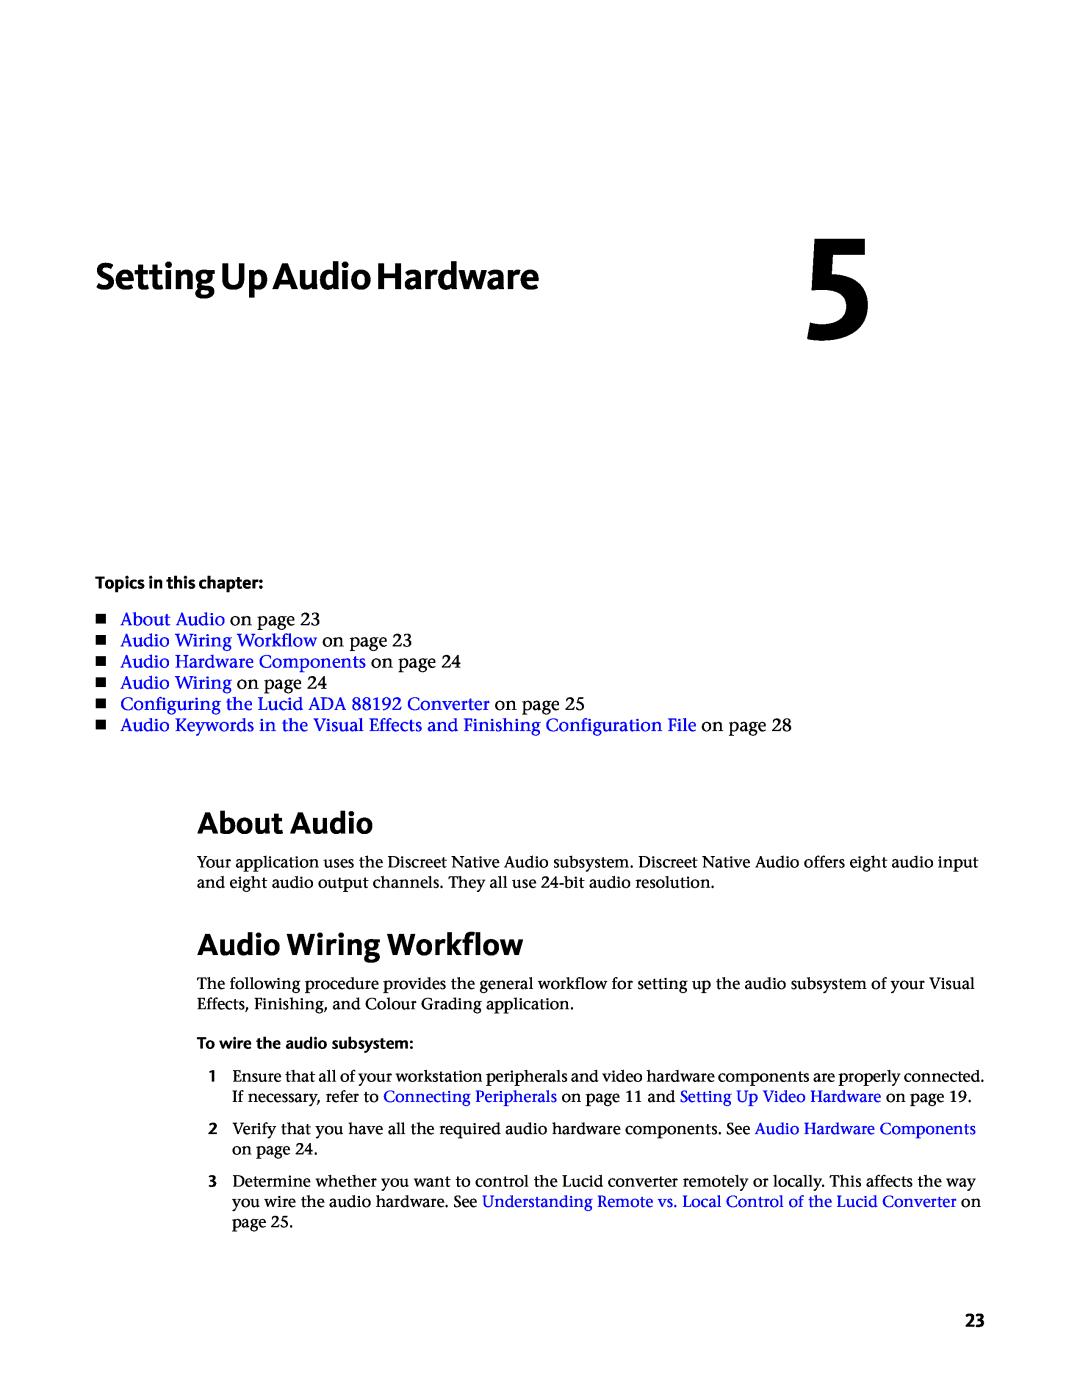 HP Z800 manual SettingUpAudioHardware5, About Audio on page Audio Wiring Workflow on page, Topics in this chapter 